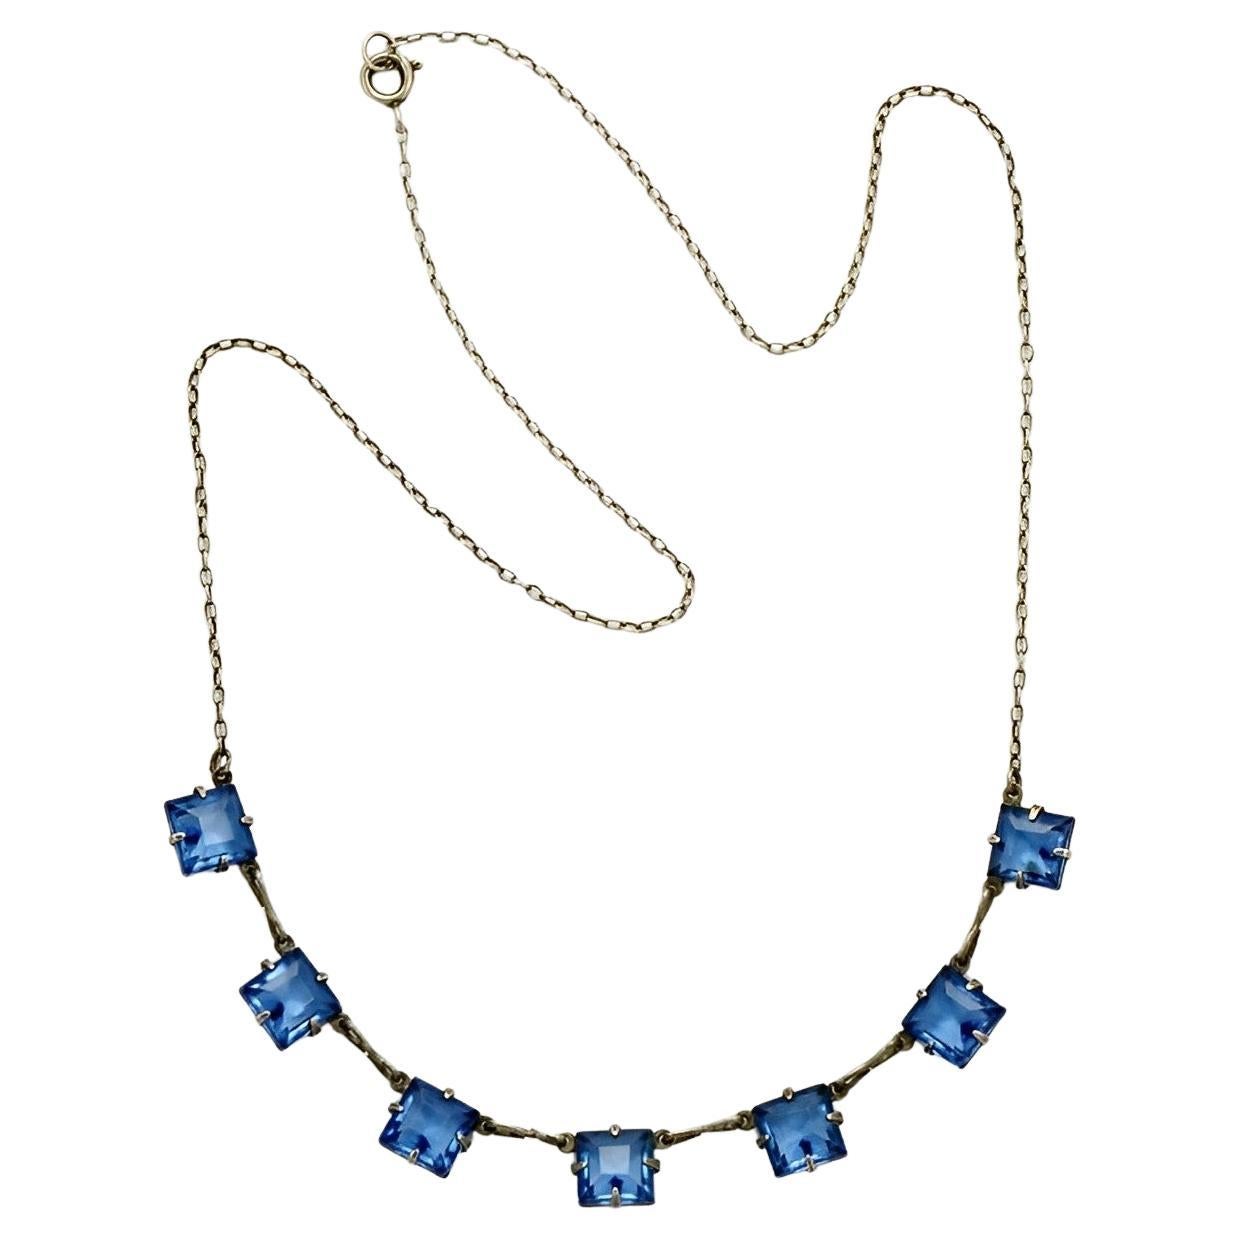 Art Deco Silver Tone Chain Necklace with Square Azure Blue Glass Crystals For Sale